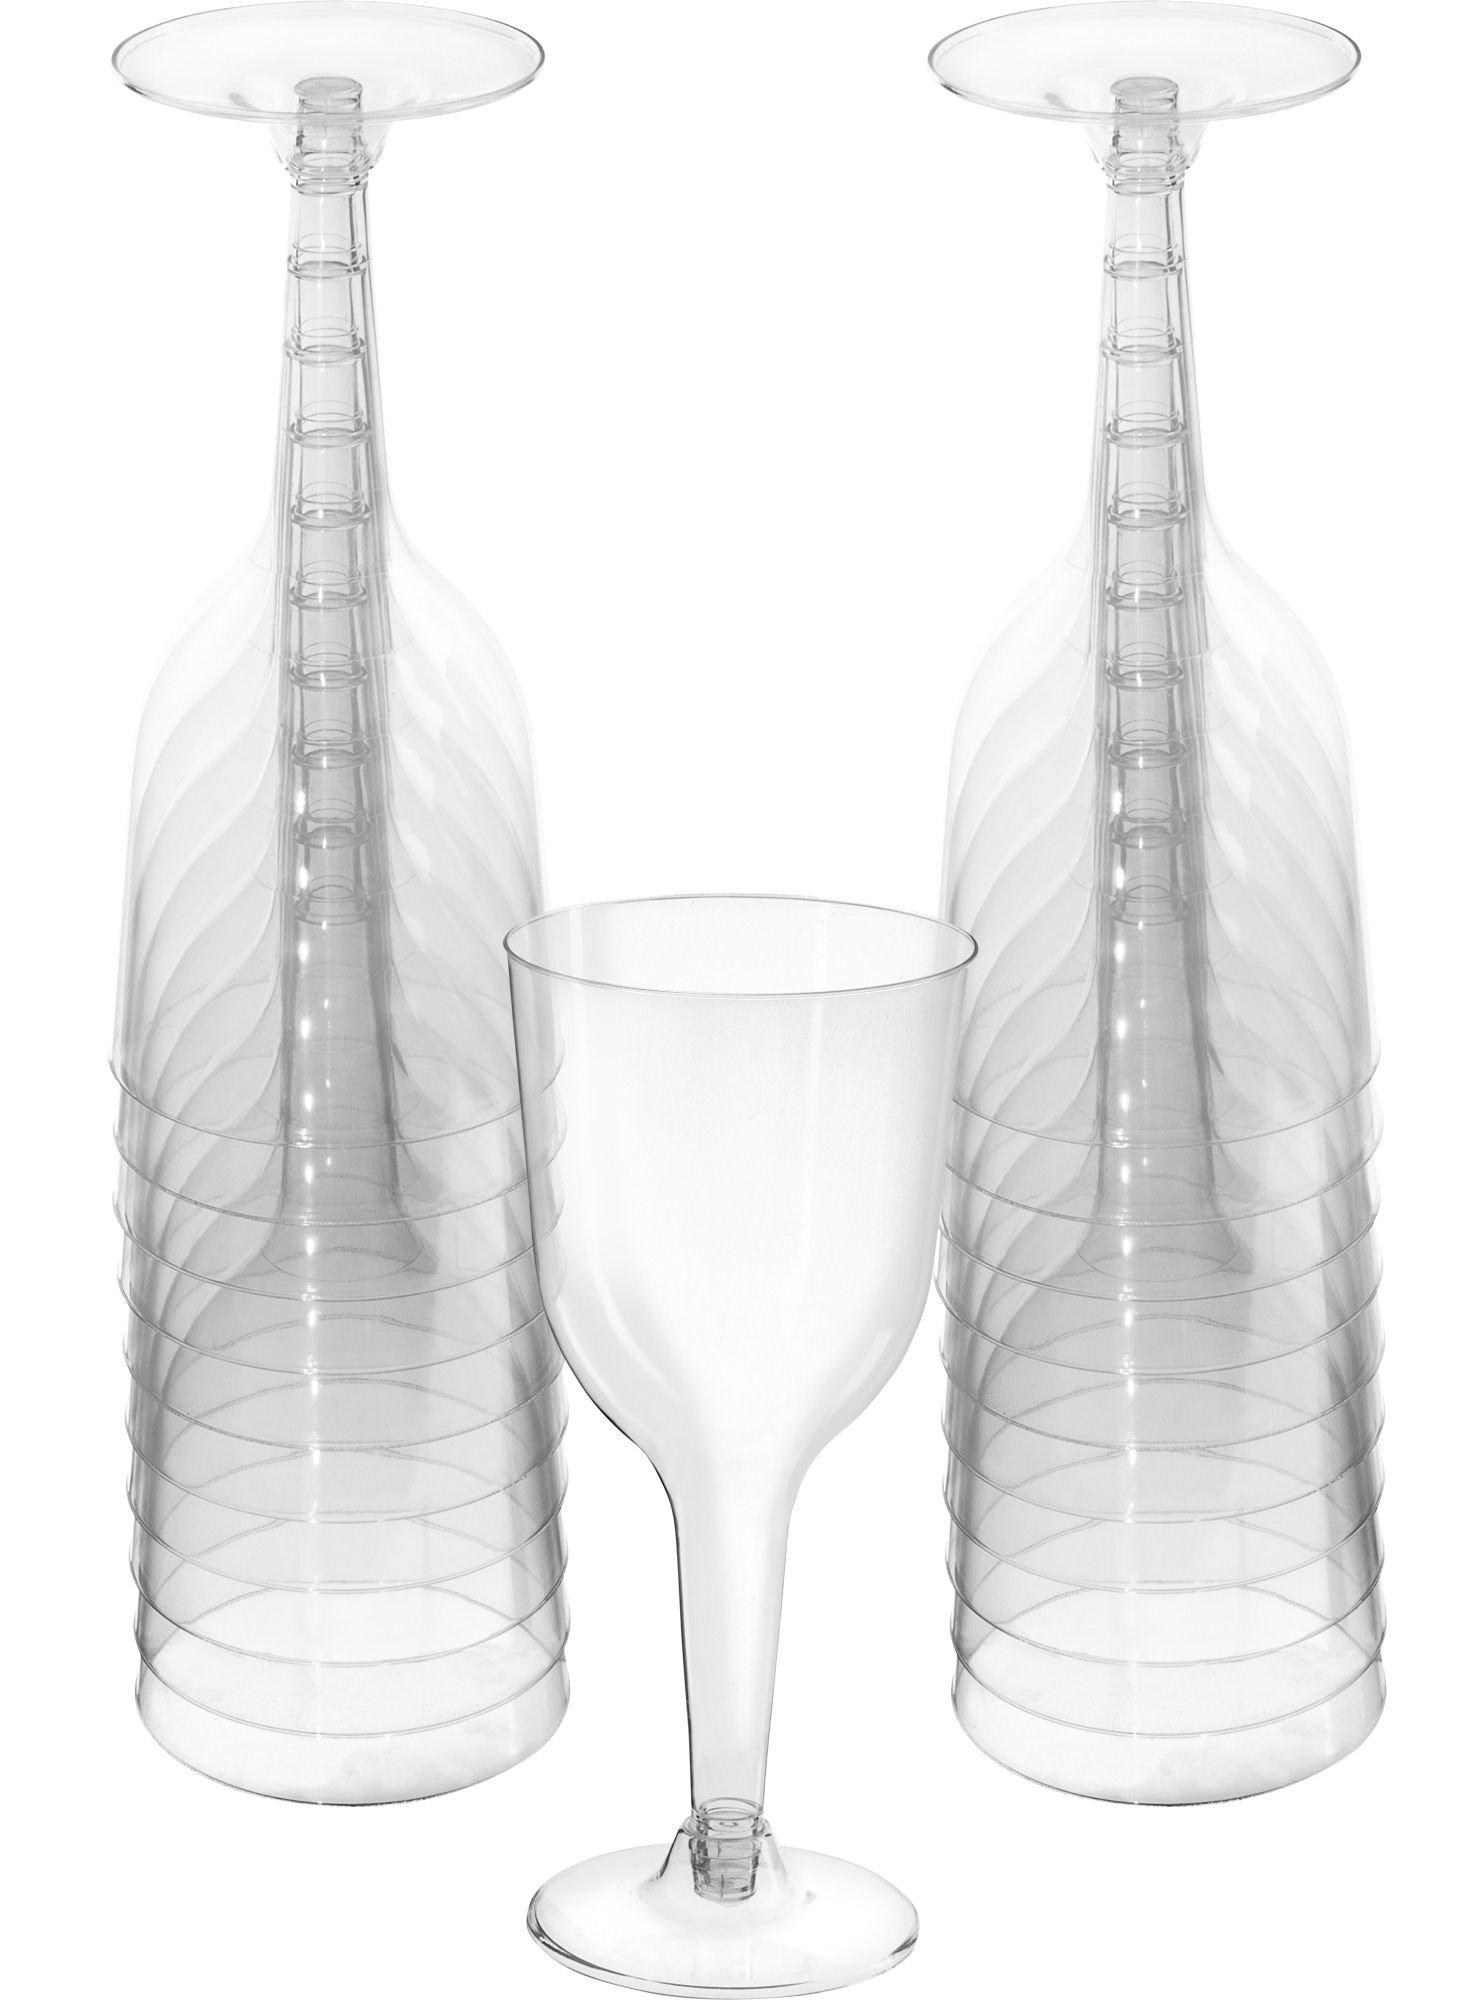 10-Ounce Clear Plastic Champagne Flutes